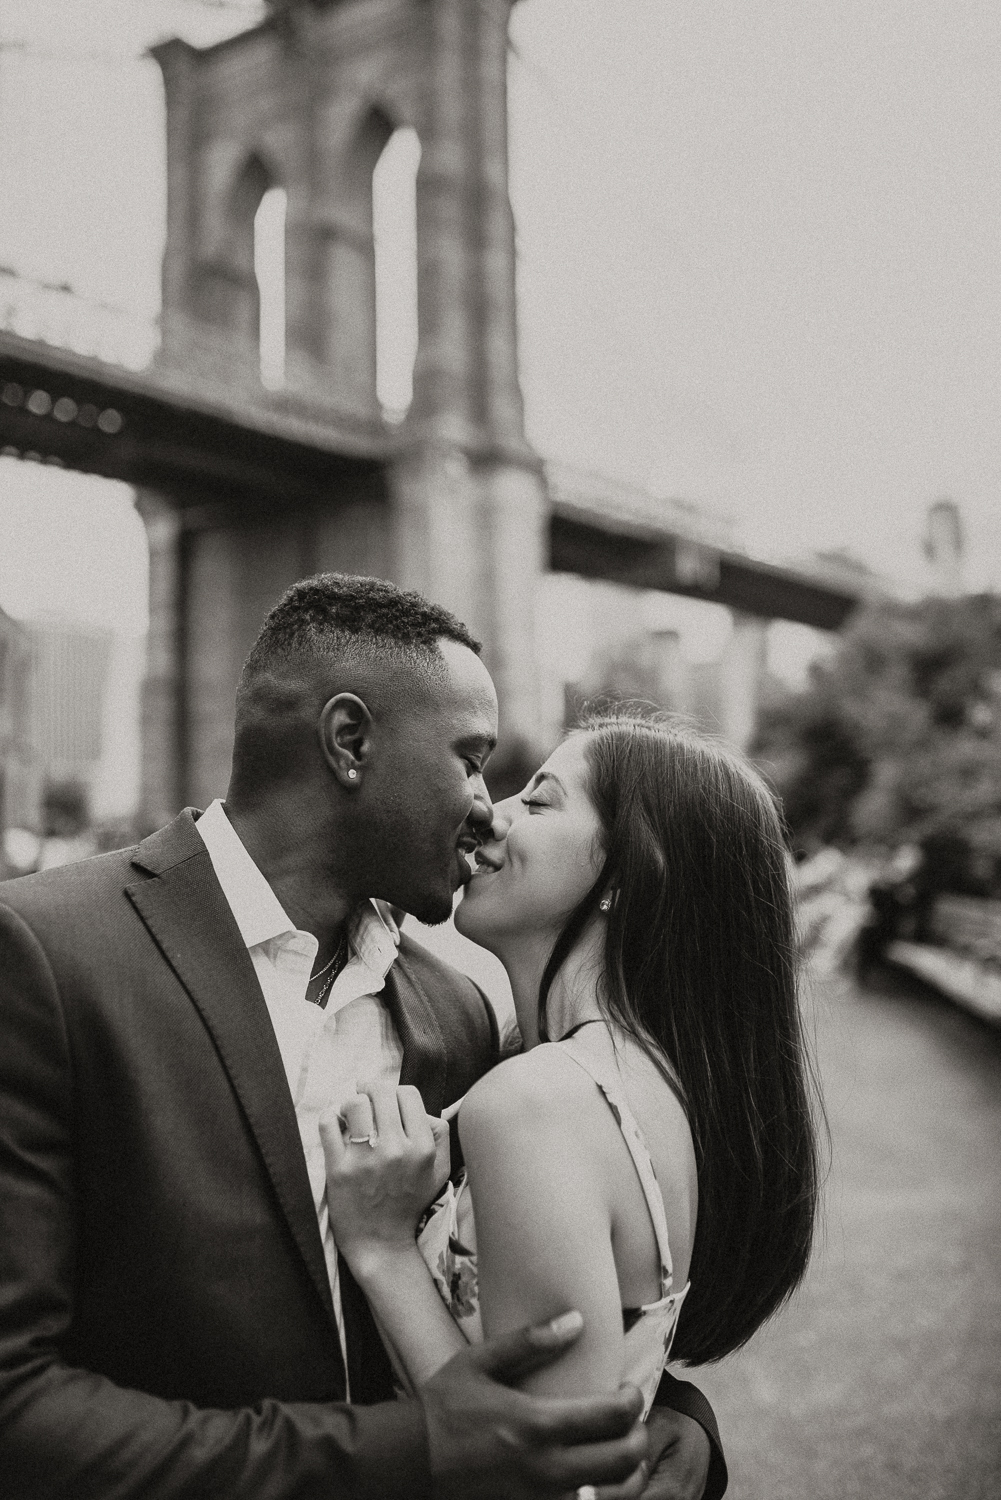 Tony & Grace | A Brooklyn, NYC Engagement Session | DFW Travel ...